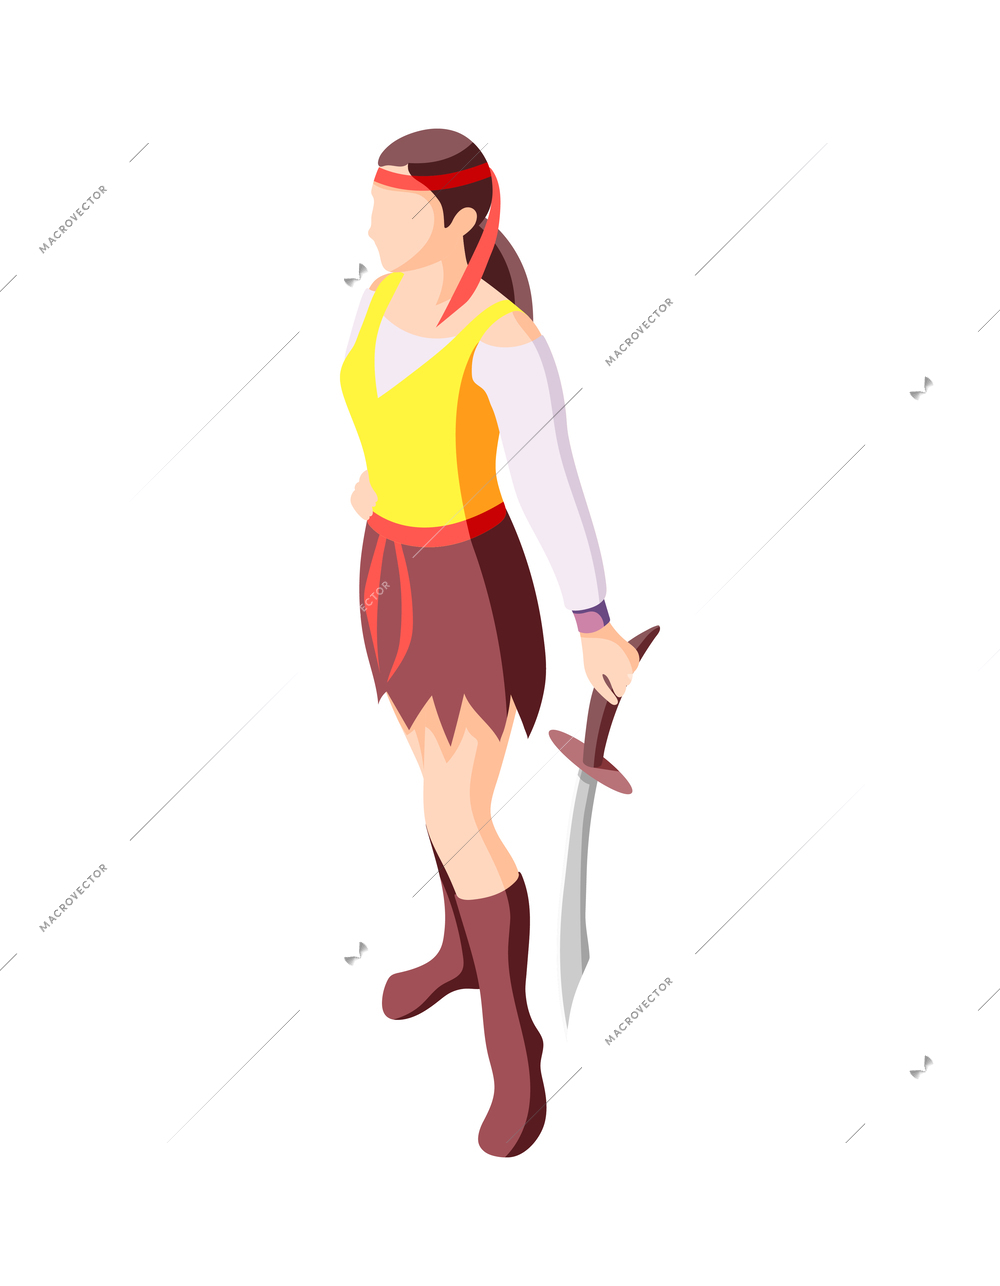 Masquerade cosplay isometric composition with isolated human character wearing festive costume vector illustration